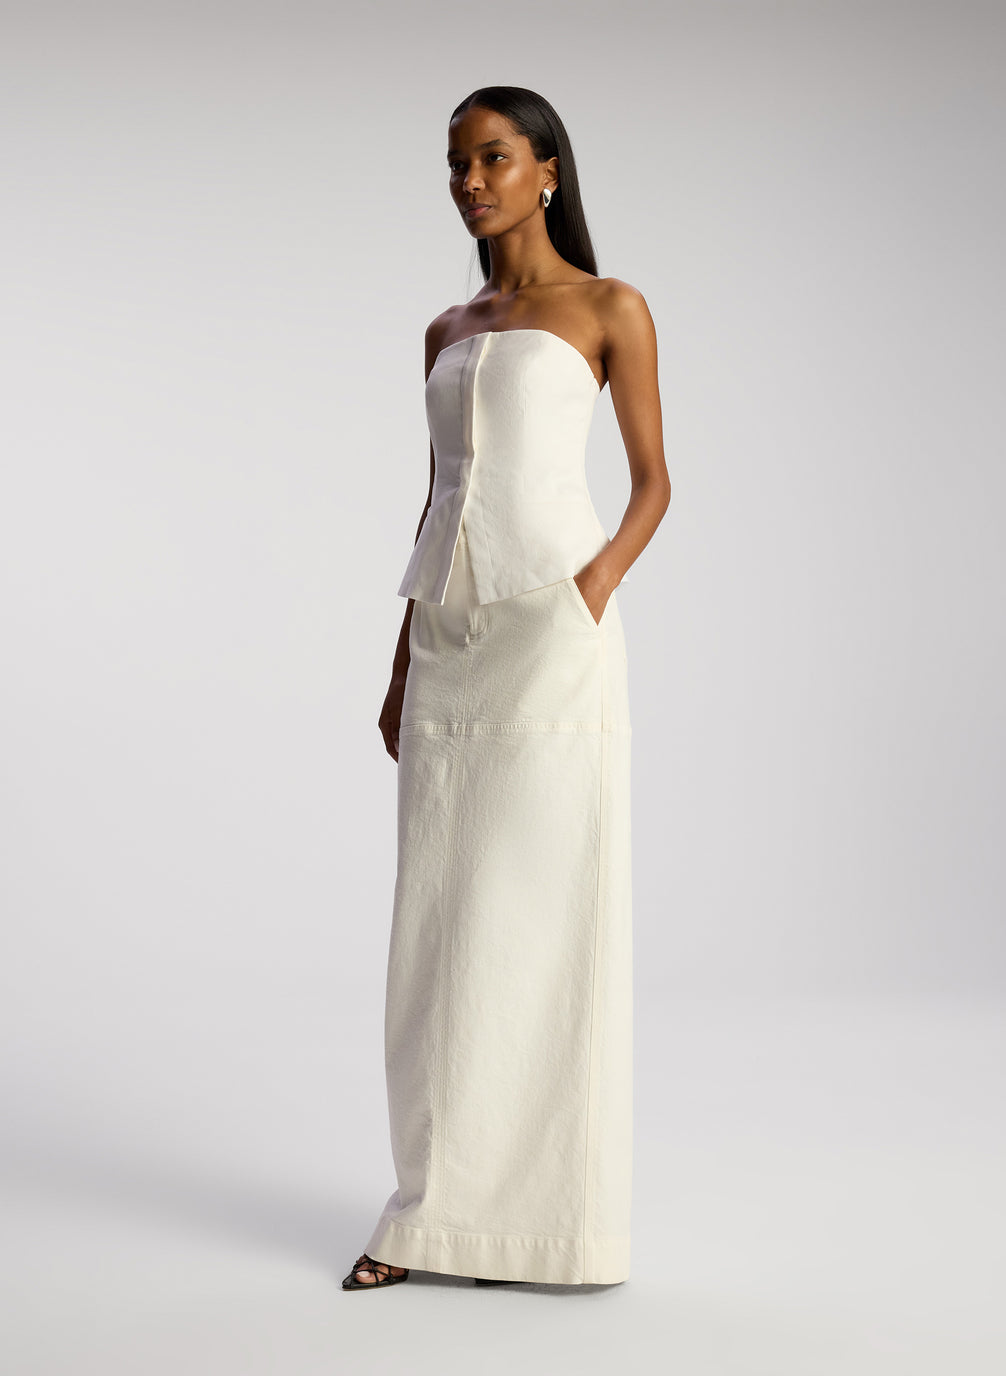 side view of woman wearing white strapless top and white maxi skirt